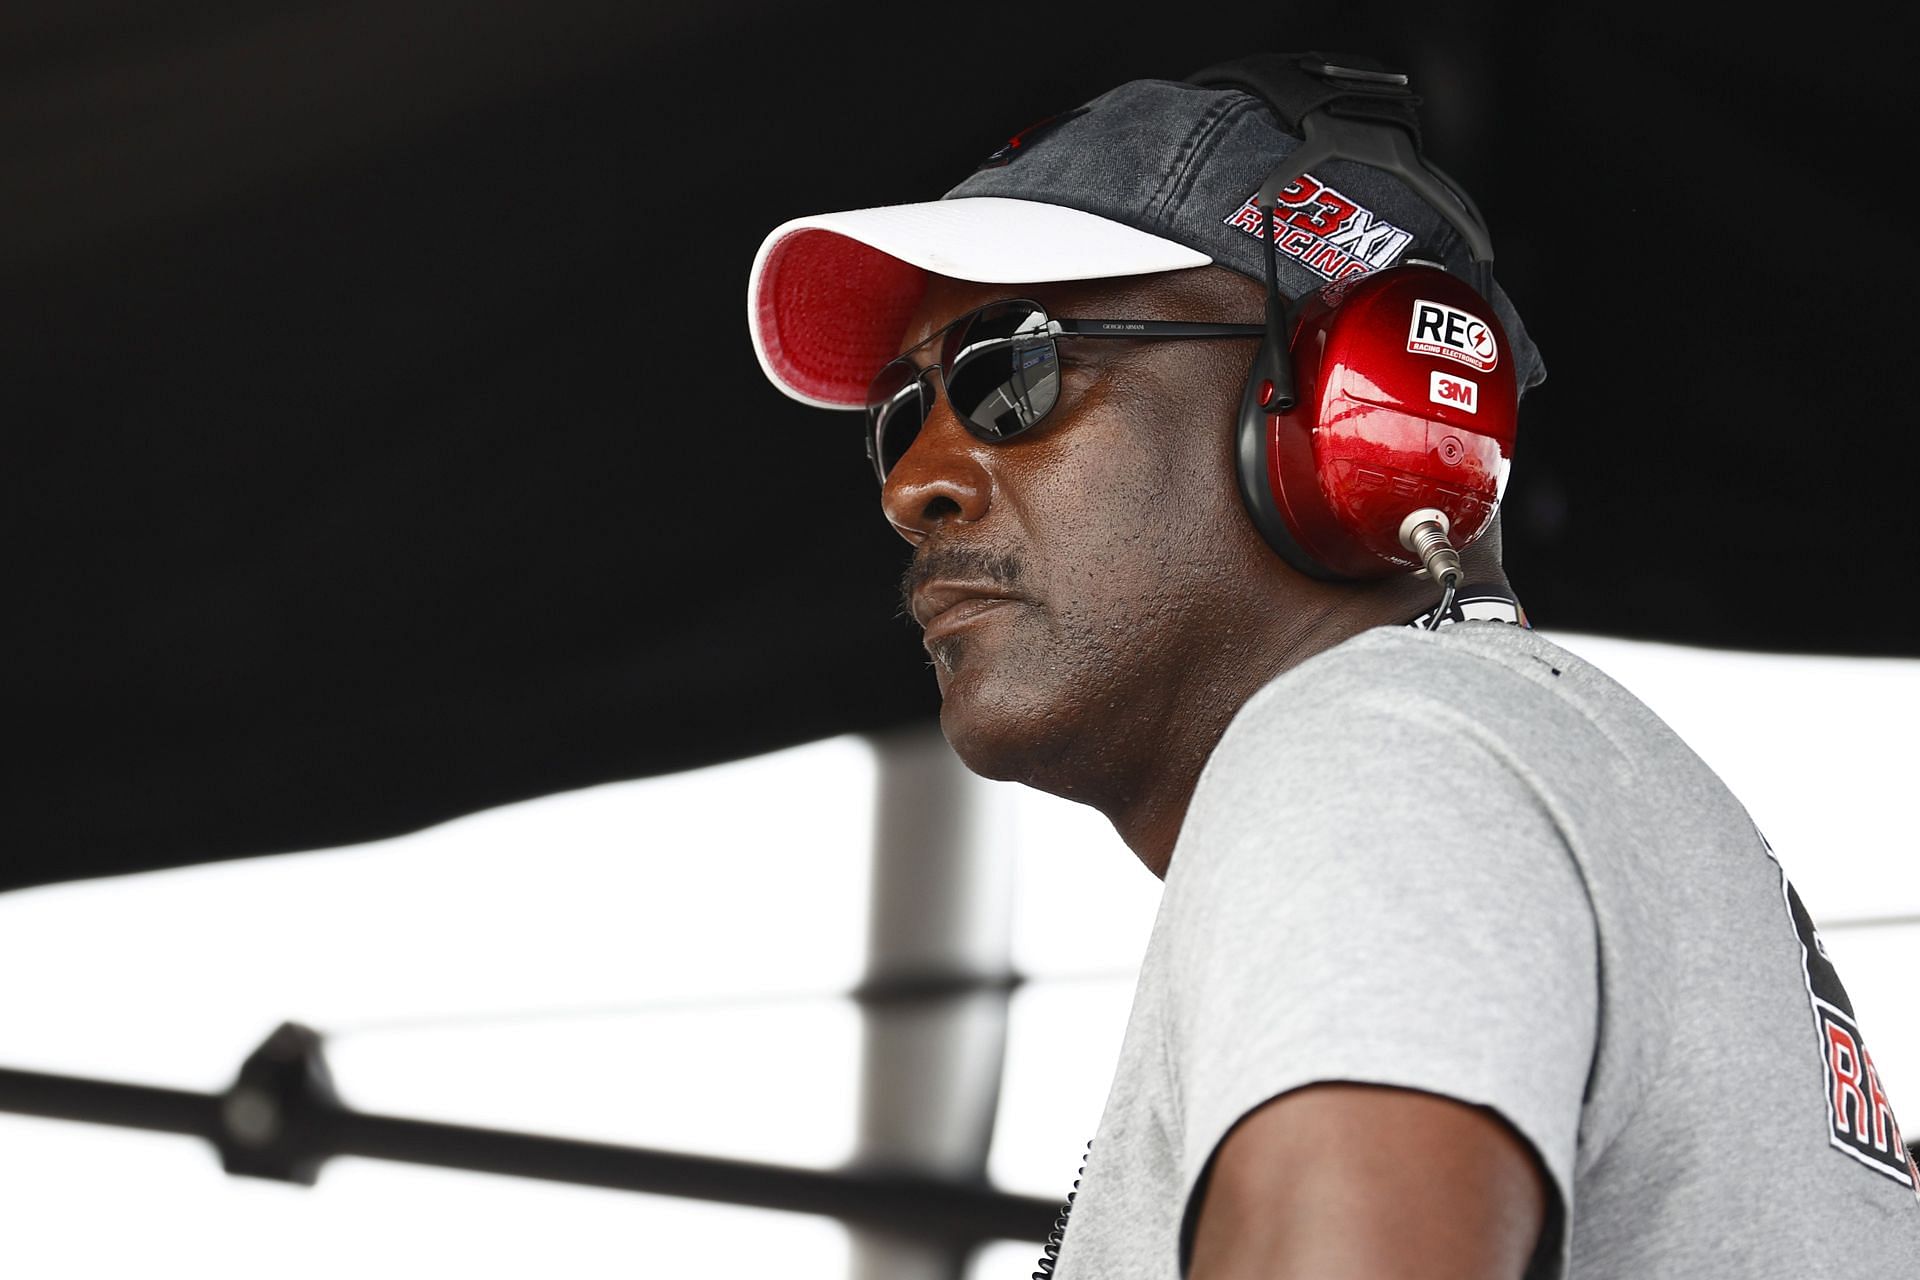 Retired NBA Hall of Famer Michael Jordan watches on as his 23XI Racing team compete in the NASCAR Cup series.